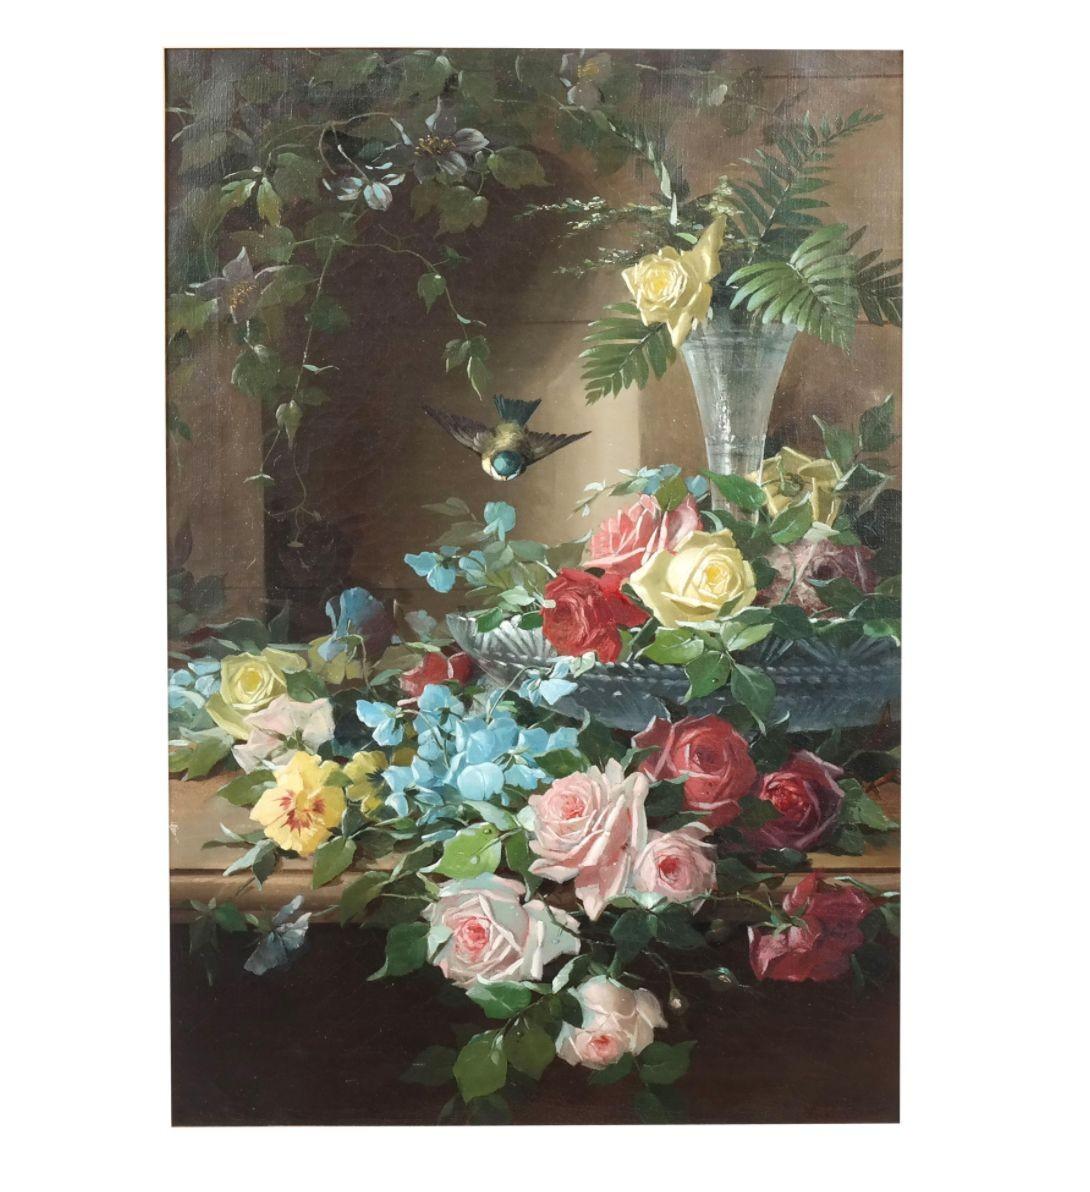 Continental school still life from the Late 19th century of flowers with a vase and bird, signed 